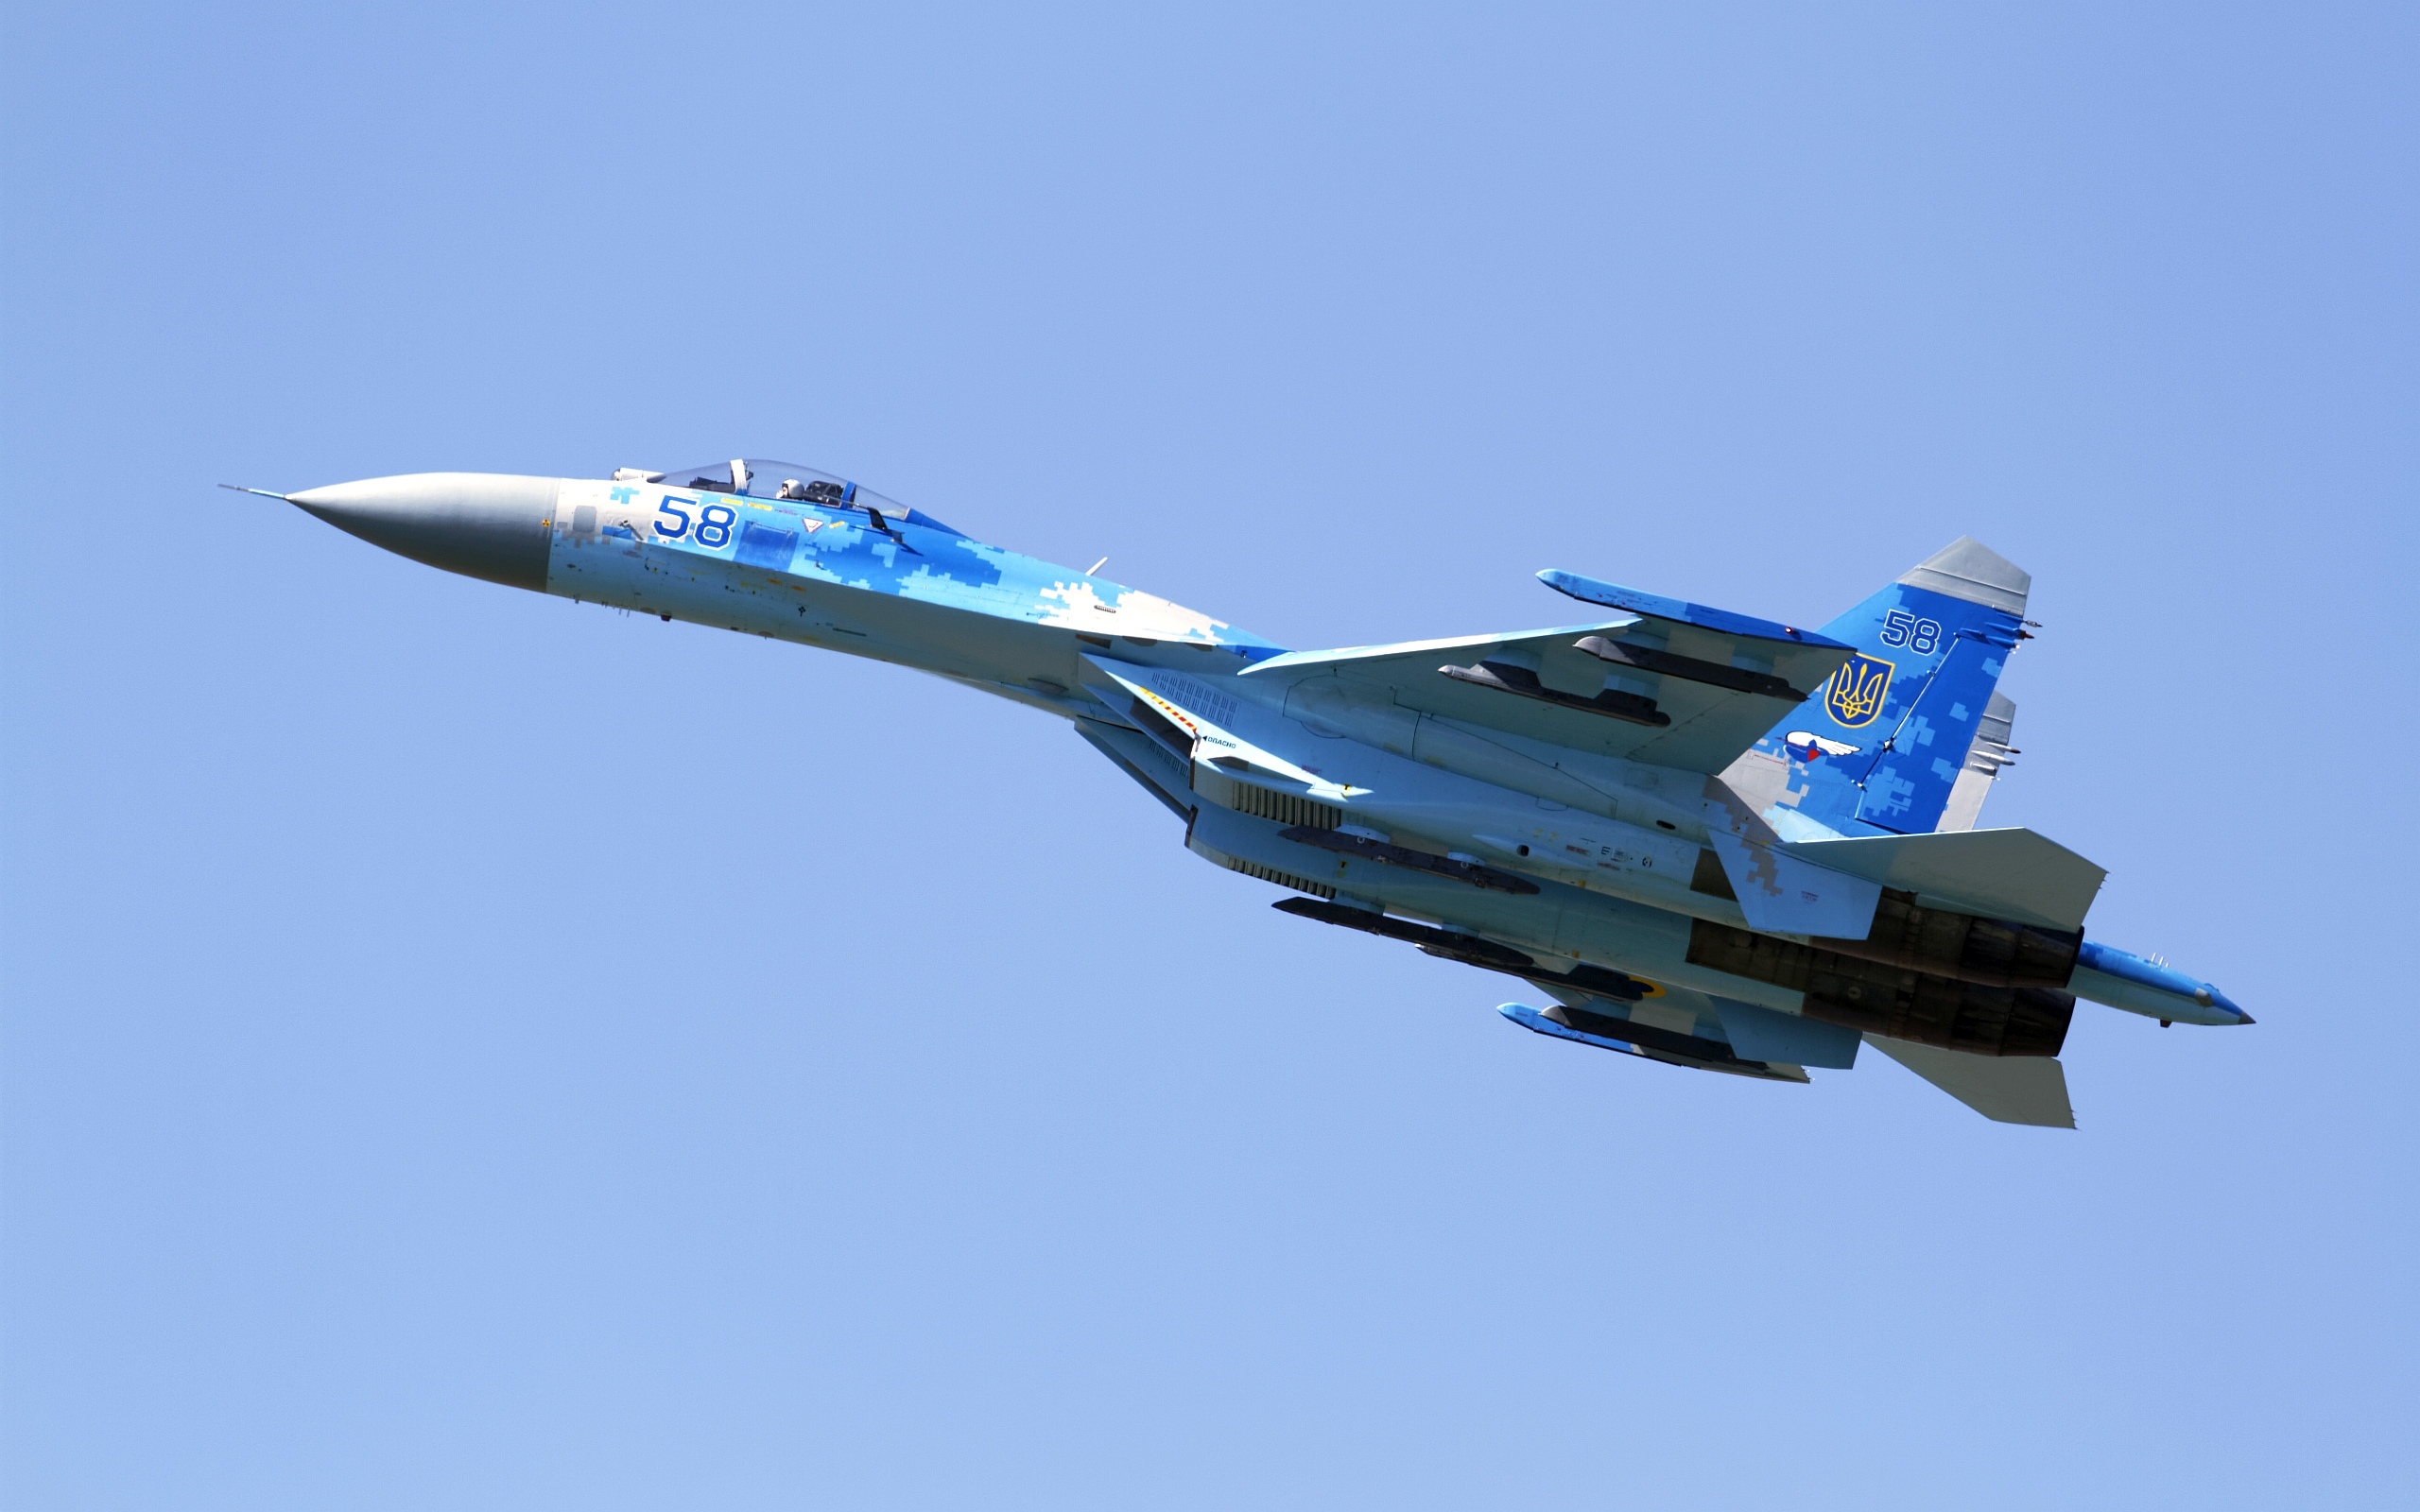 Free download 9612 Sukhoi Su 27 backgrounds hd 2019 ...